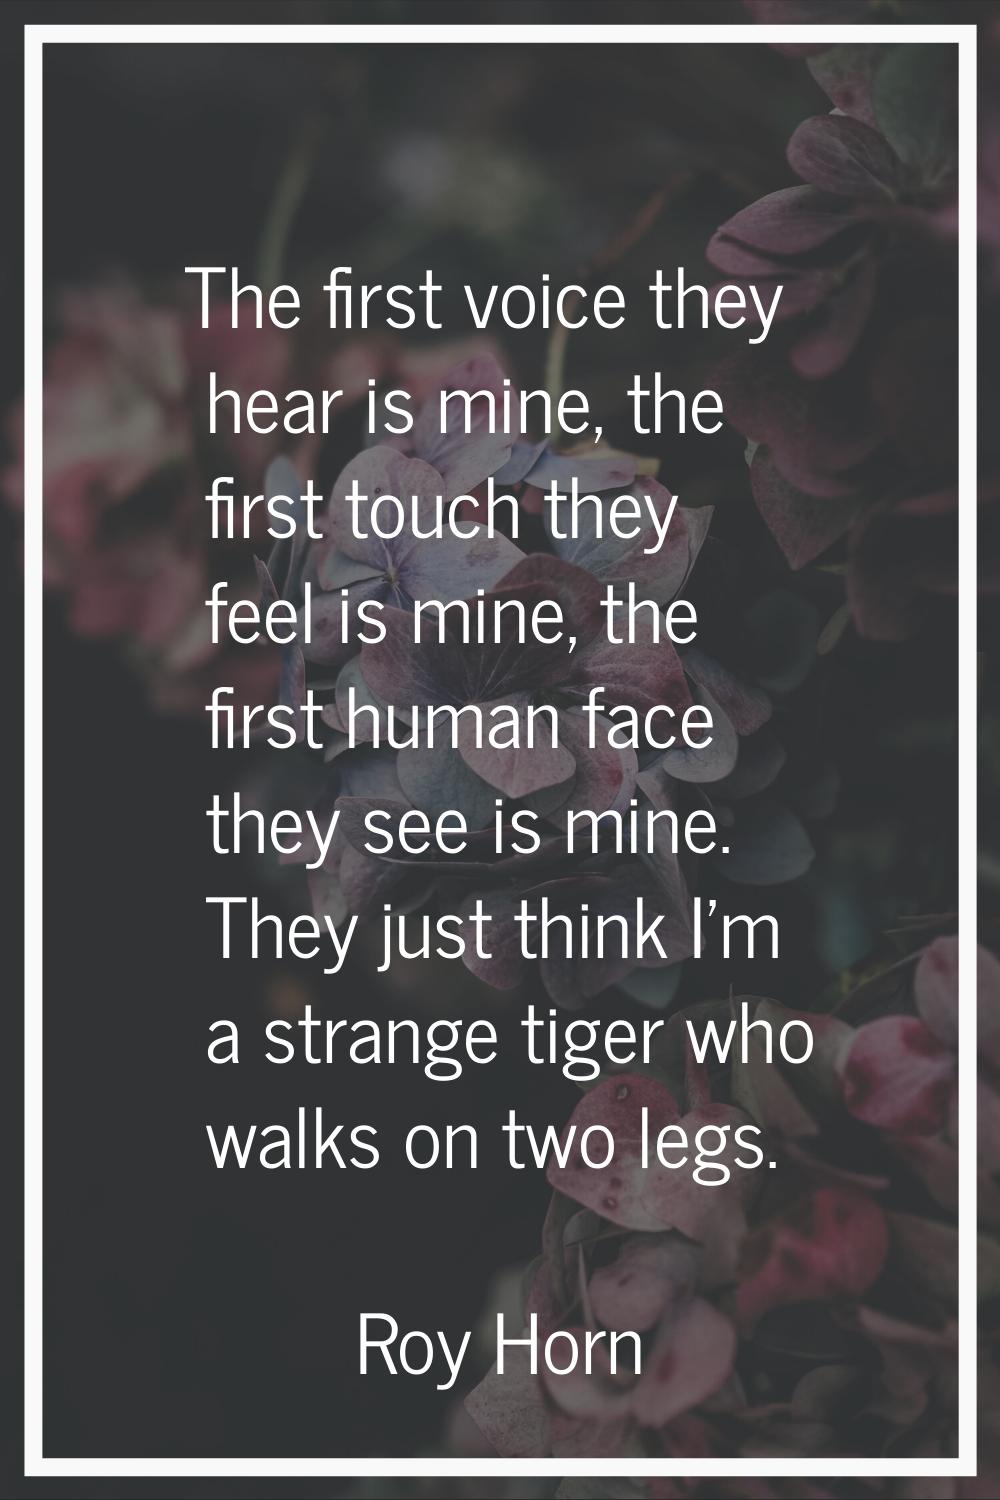 The first voice they hear is mine, the first touch they feel is mine, the first human face they see